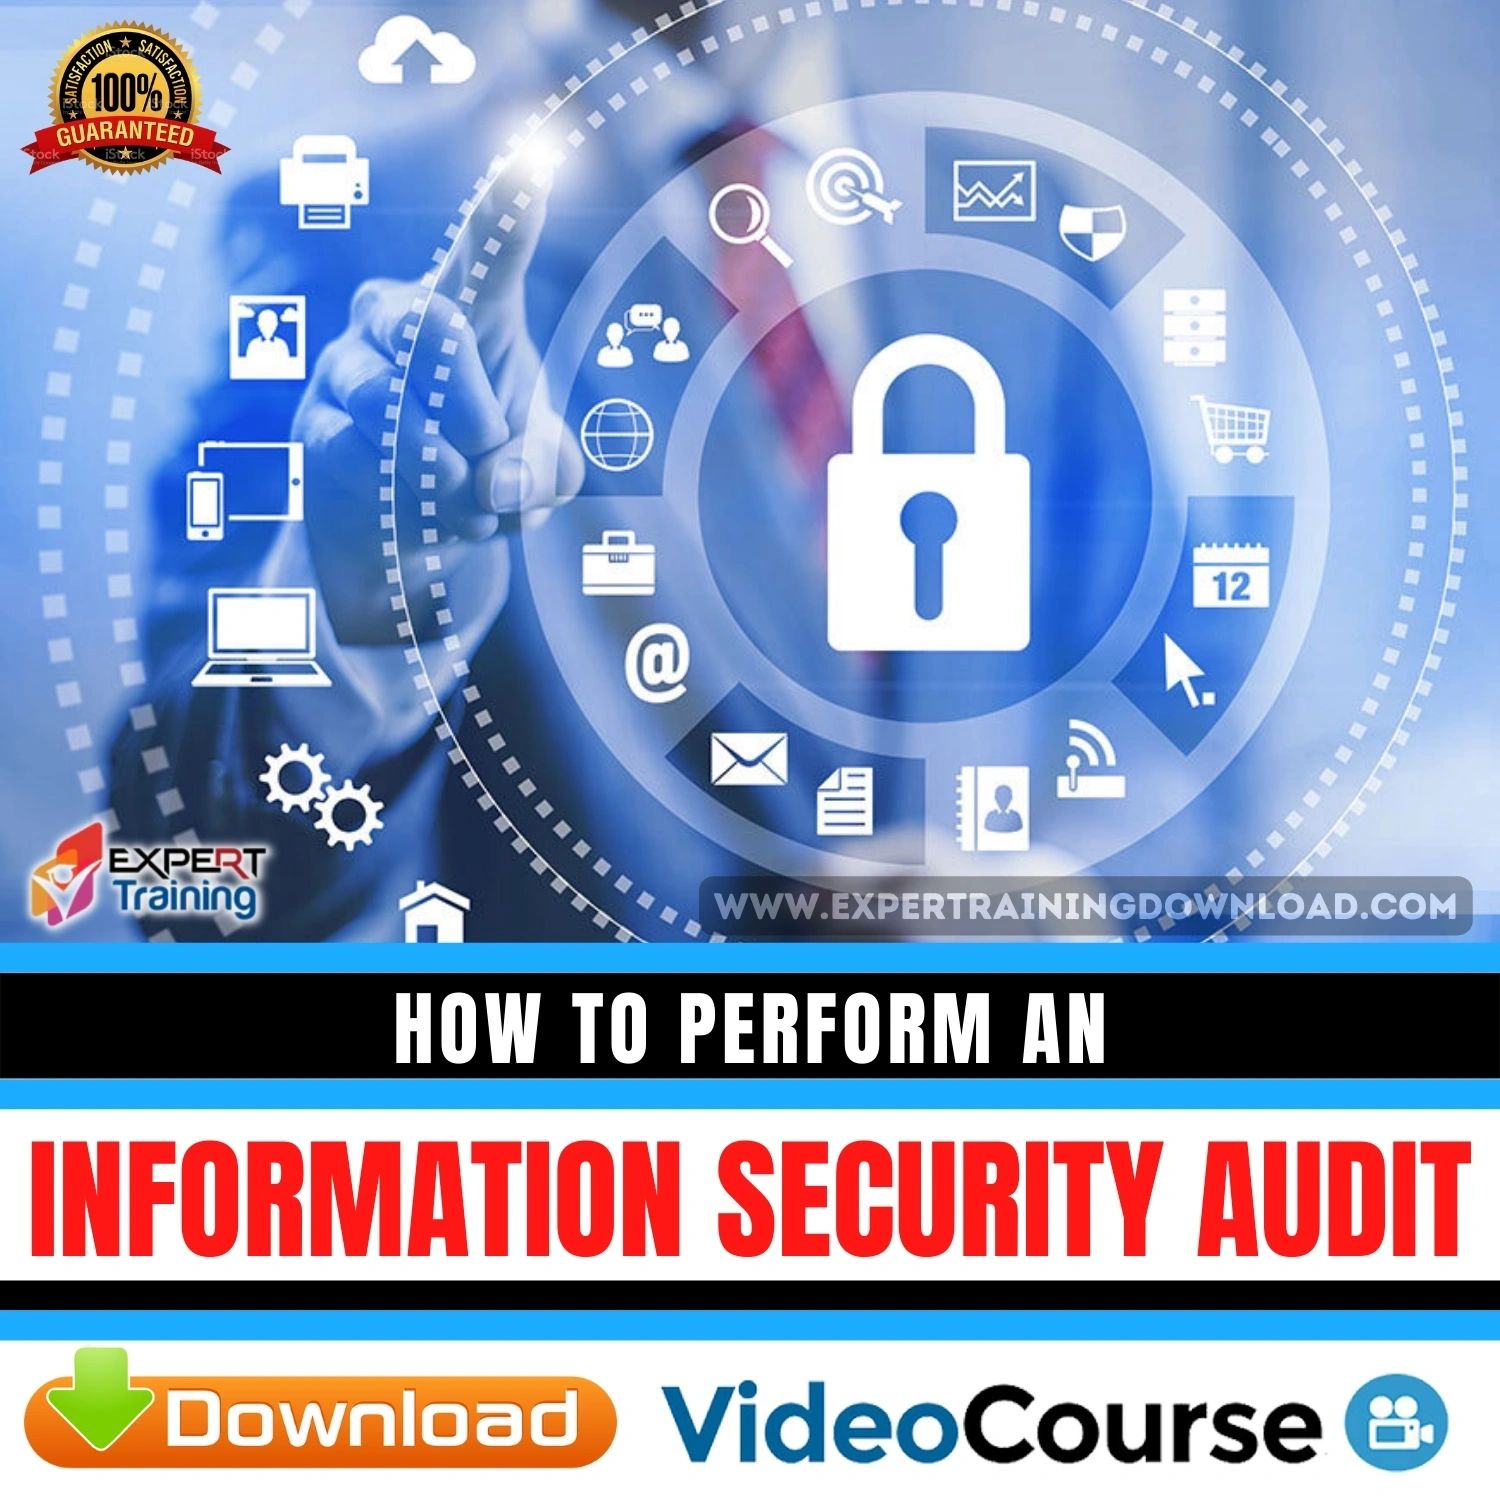 How To Perform An Information Security Audit